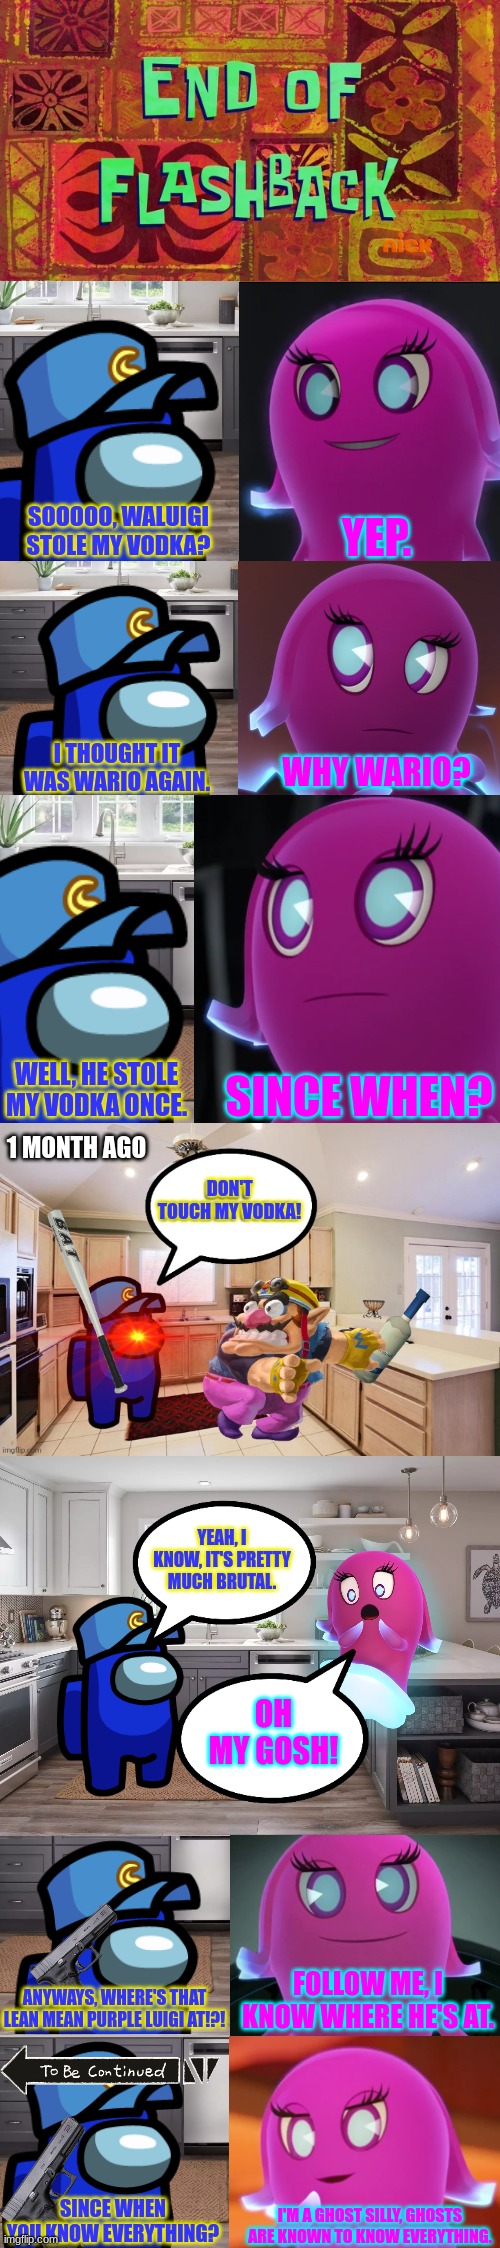 When someone steals Cam's Vodka Part 3 | image tagged in ocs,wario,waluigi,pacman,ghost,crossover | made w/ Imgflip meme maker